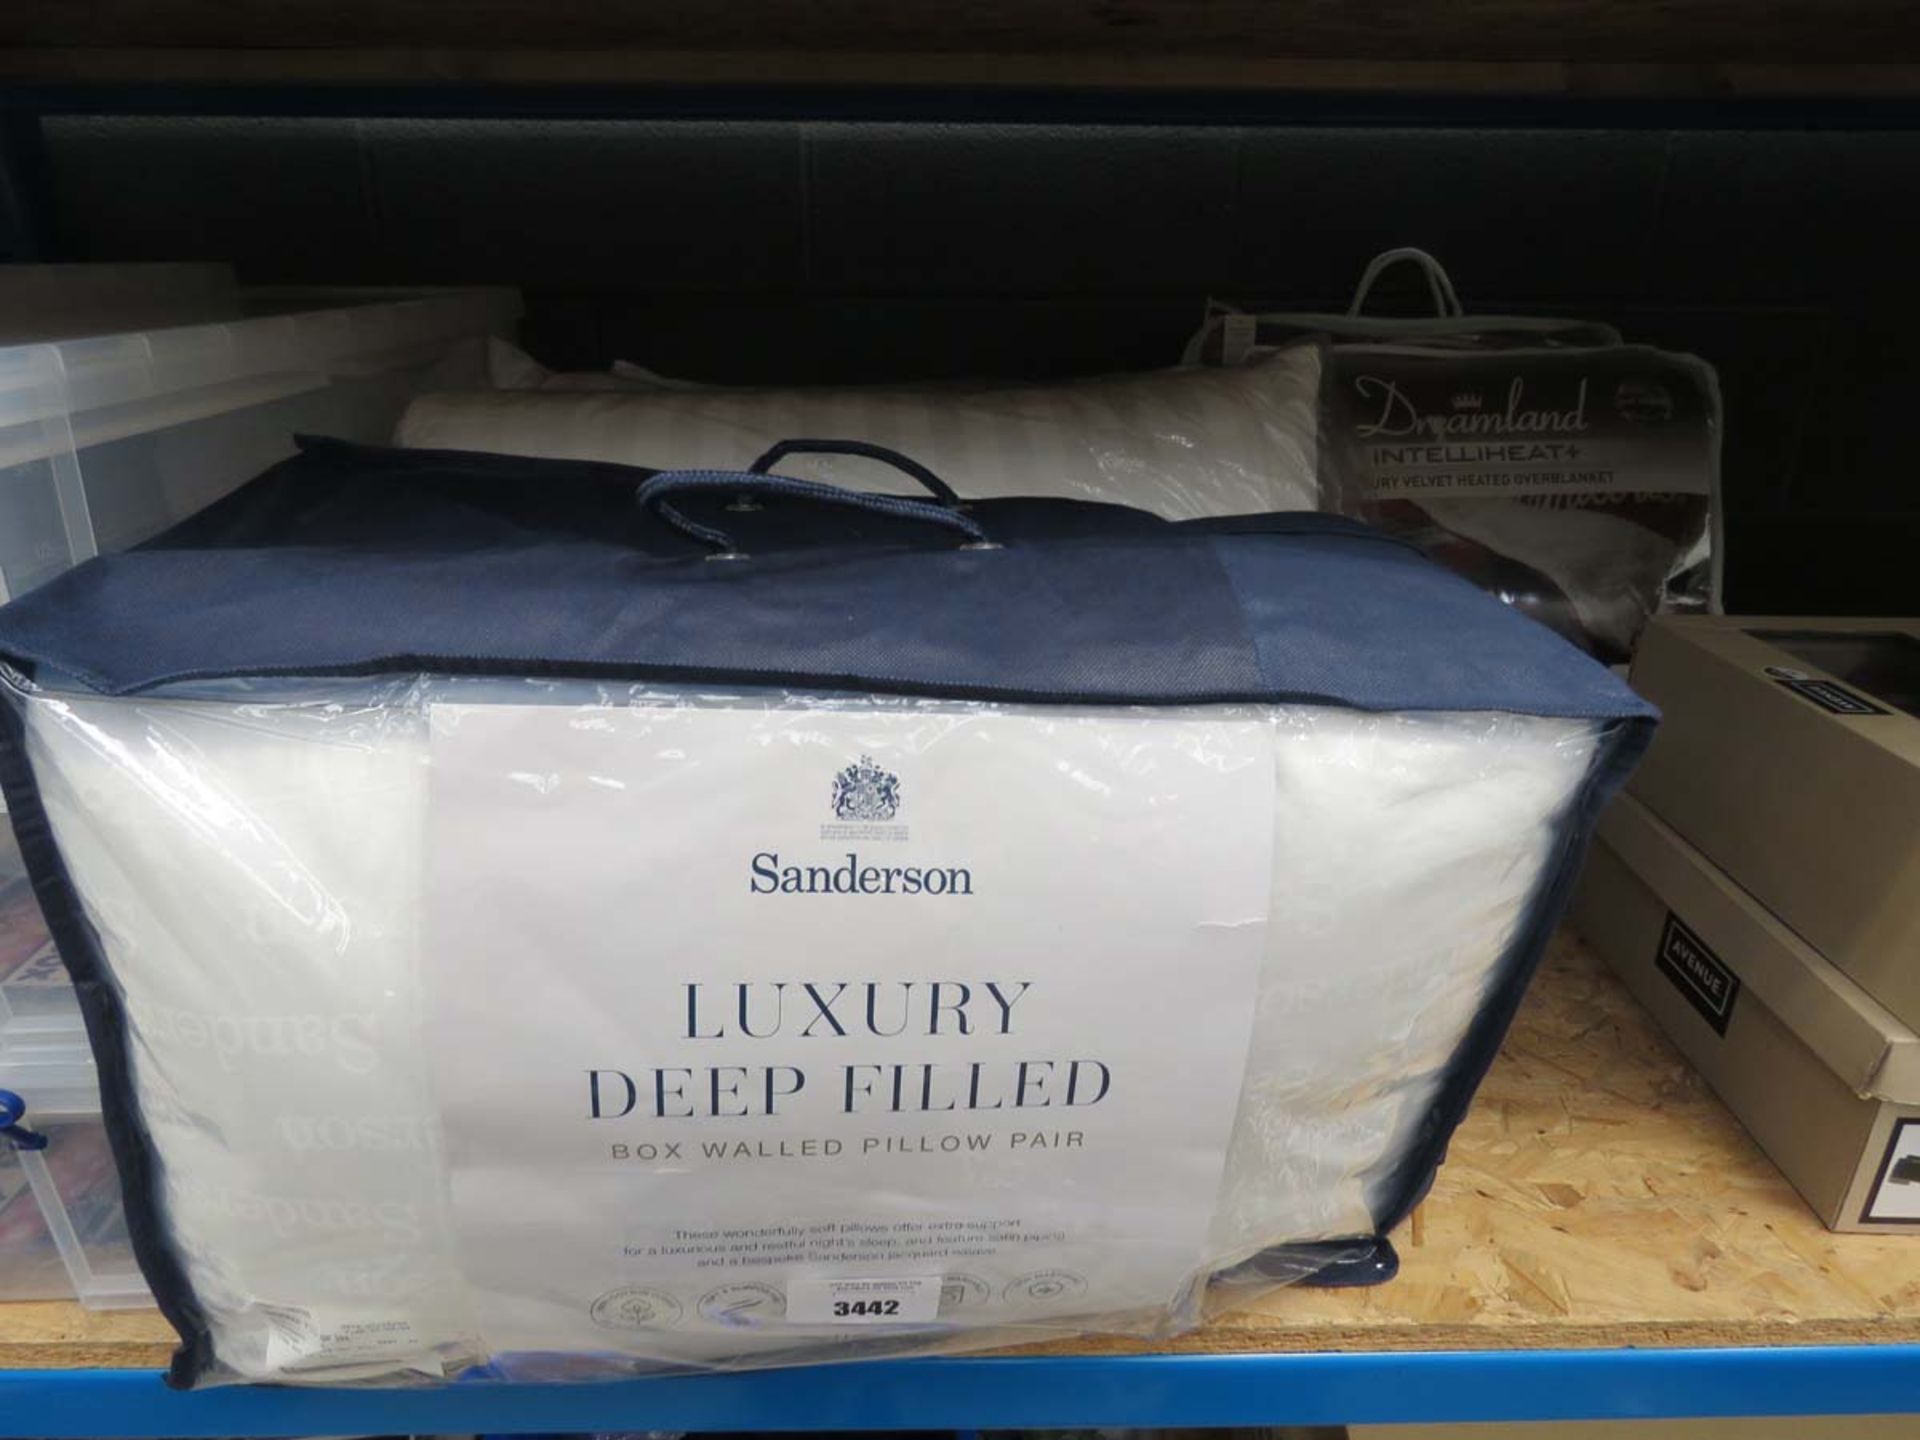 Luxury deep filled pillow, plus 3 Hotel Grand loose pillows and Dreamland heated blanket